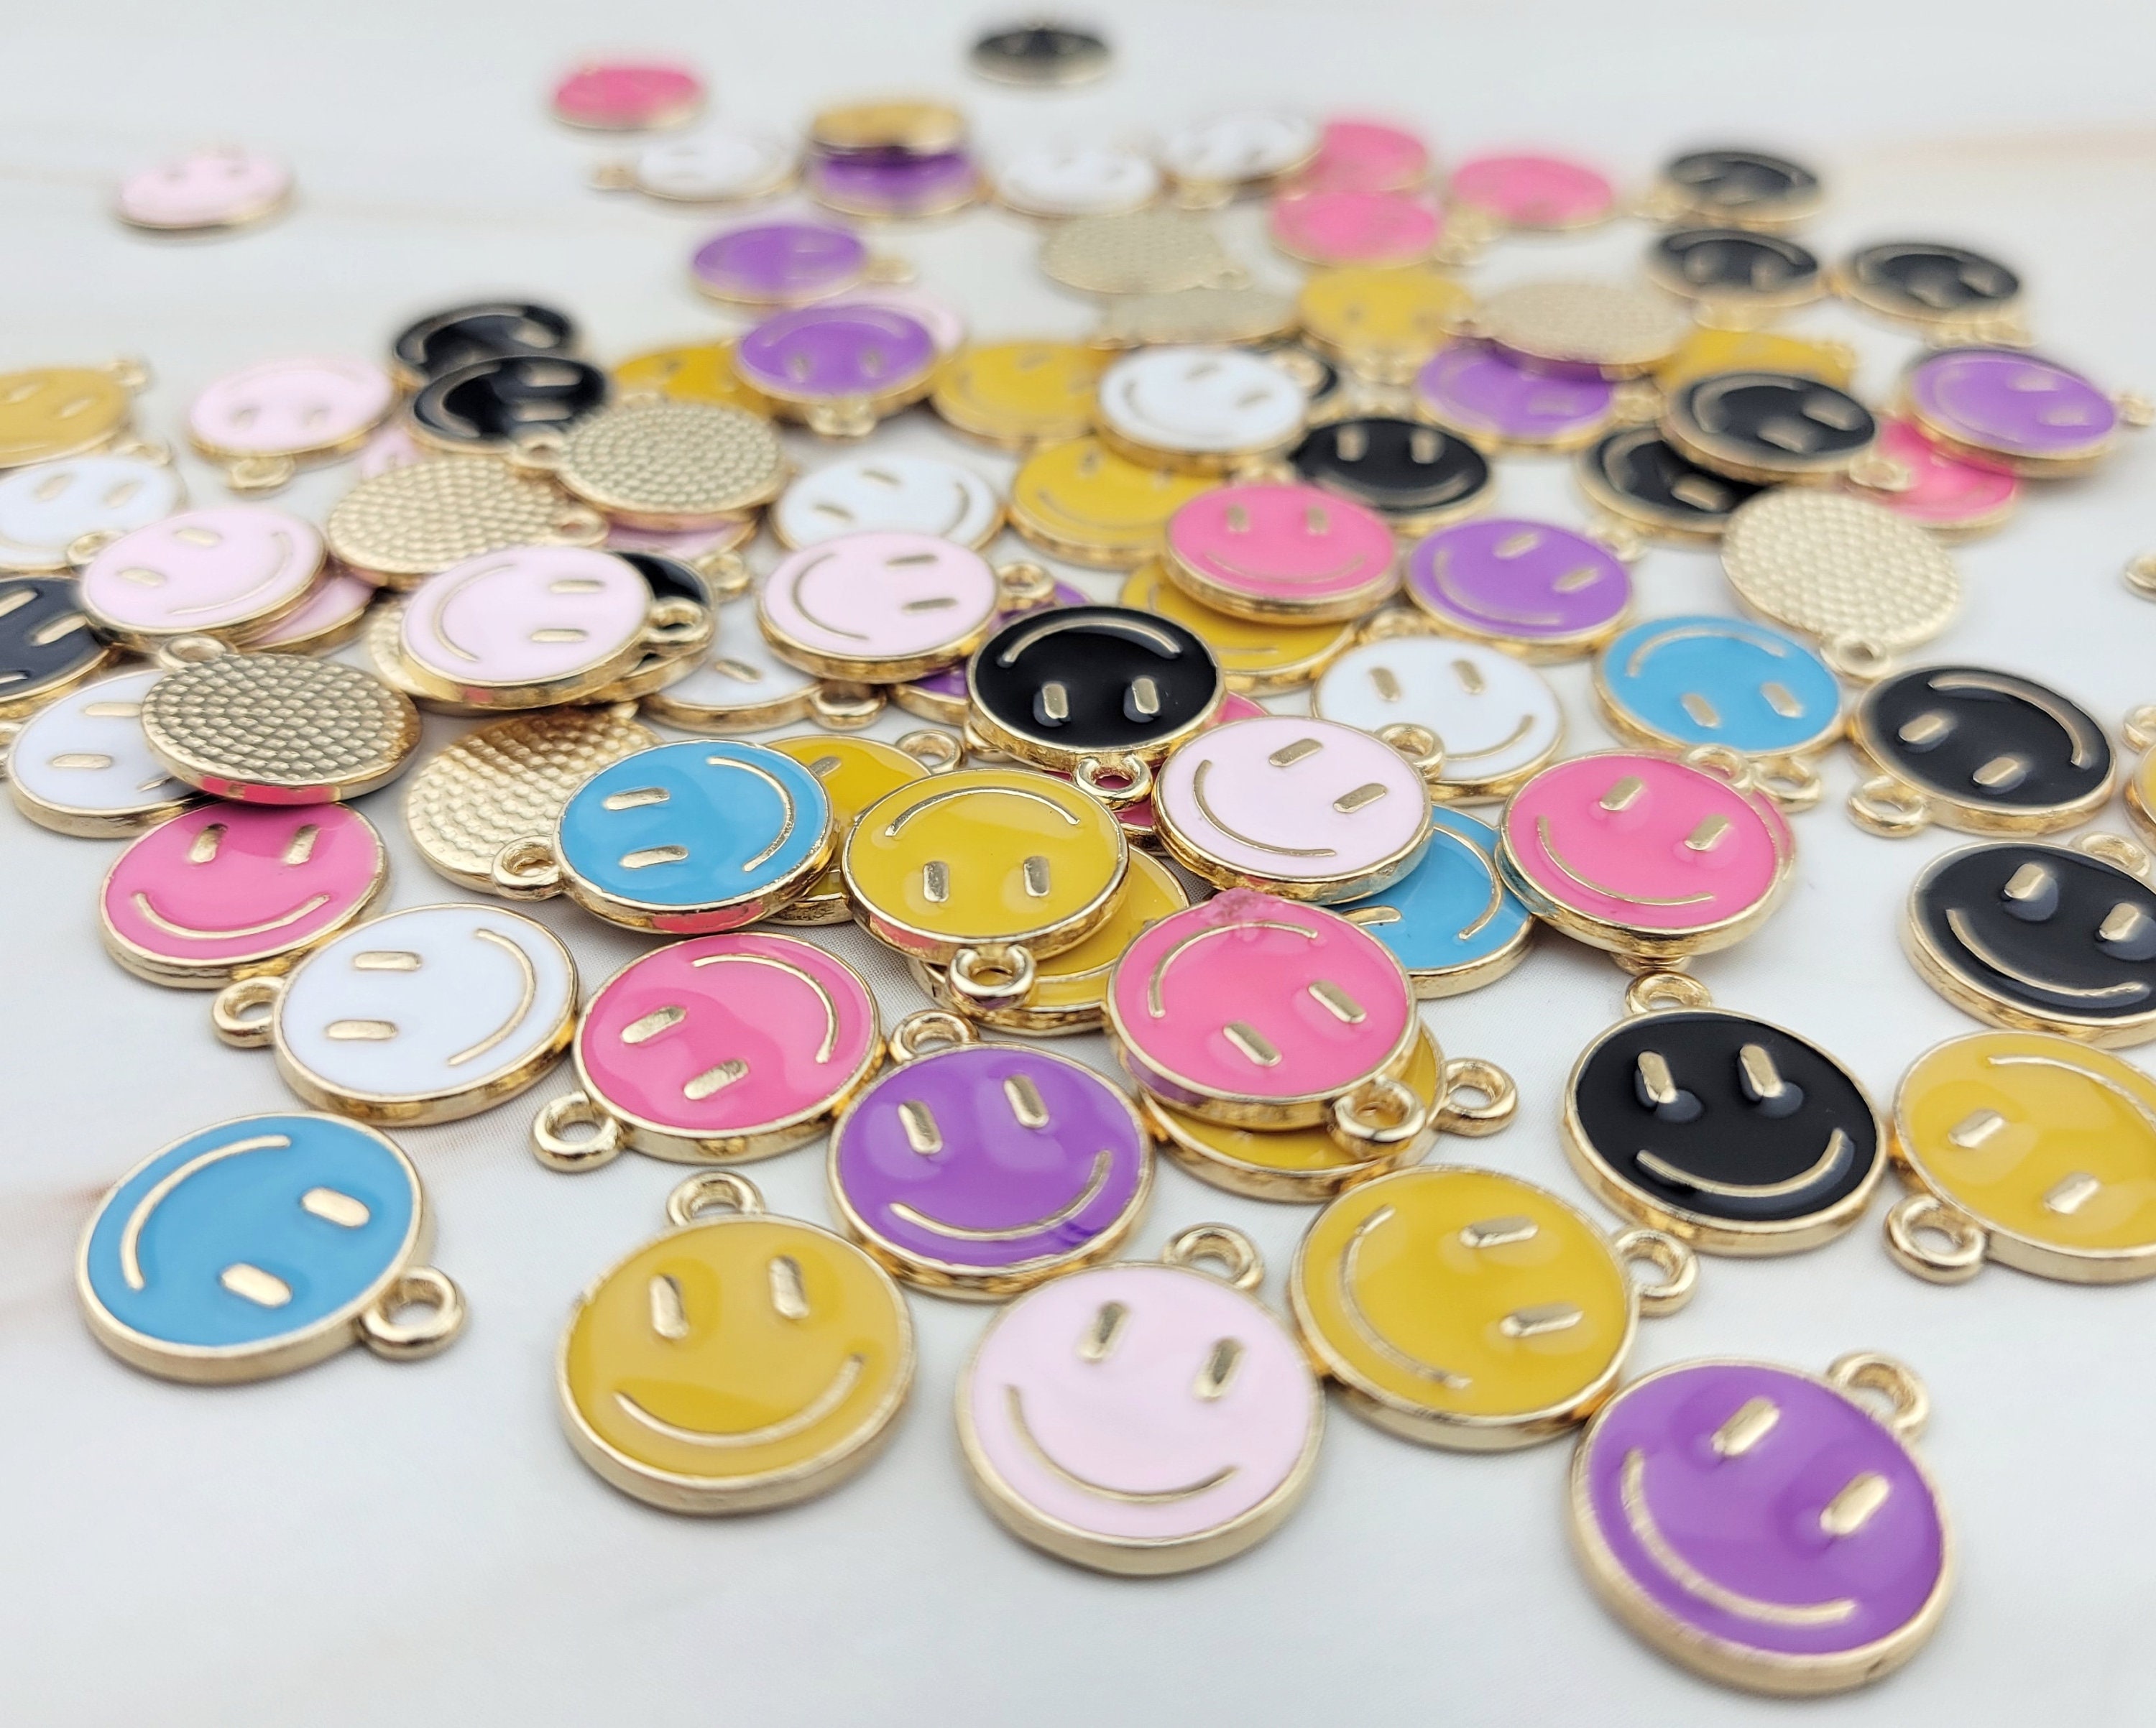 Smiley face flower charms, rainbow charms, charm bracelets, jewelry making  charms, cute charms, unique charms, 5 per pack